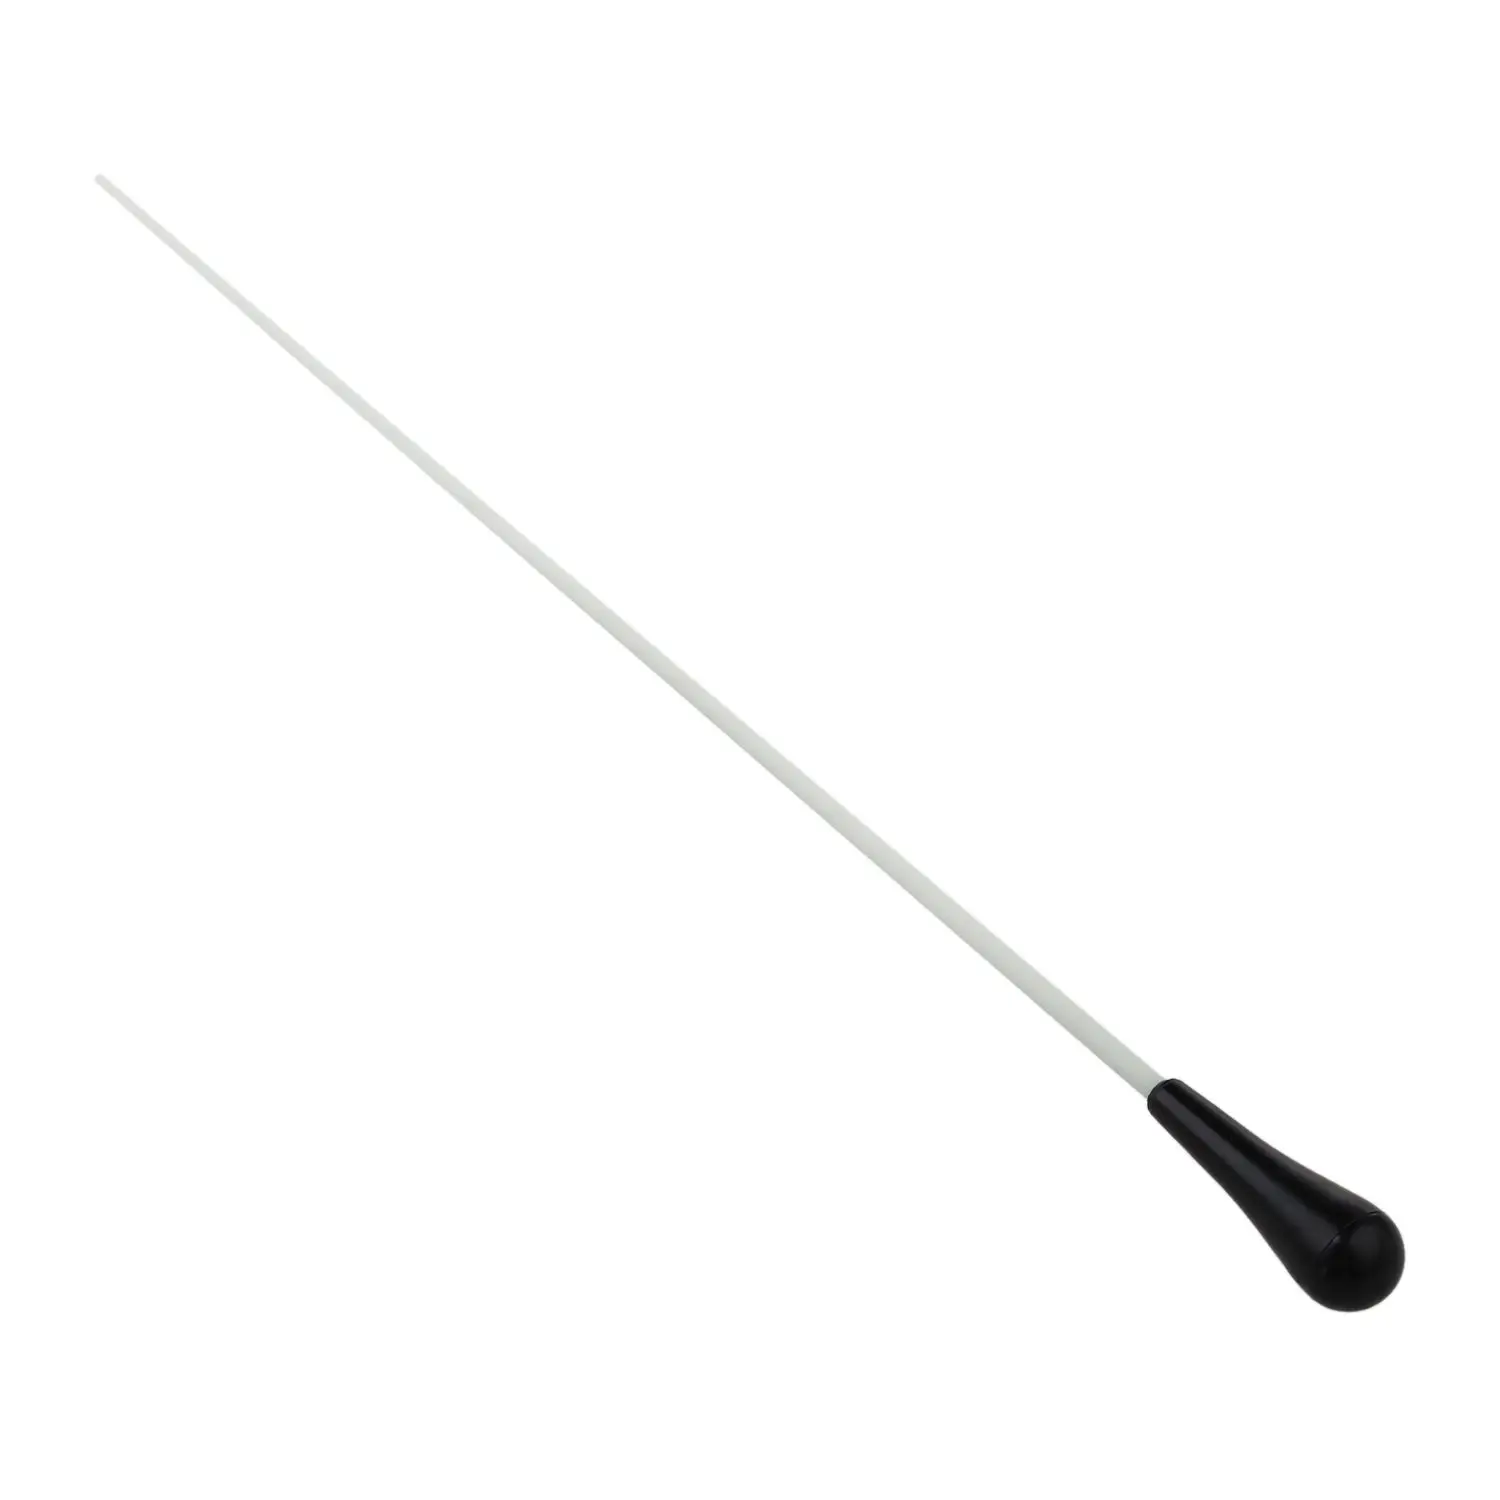 

New Black ABS Handle Musical Music Conductor Baton Gift White 15inch